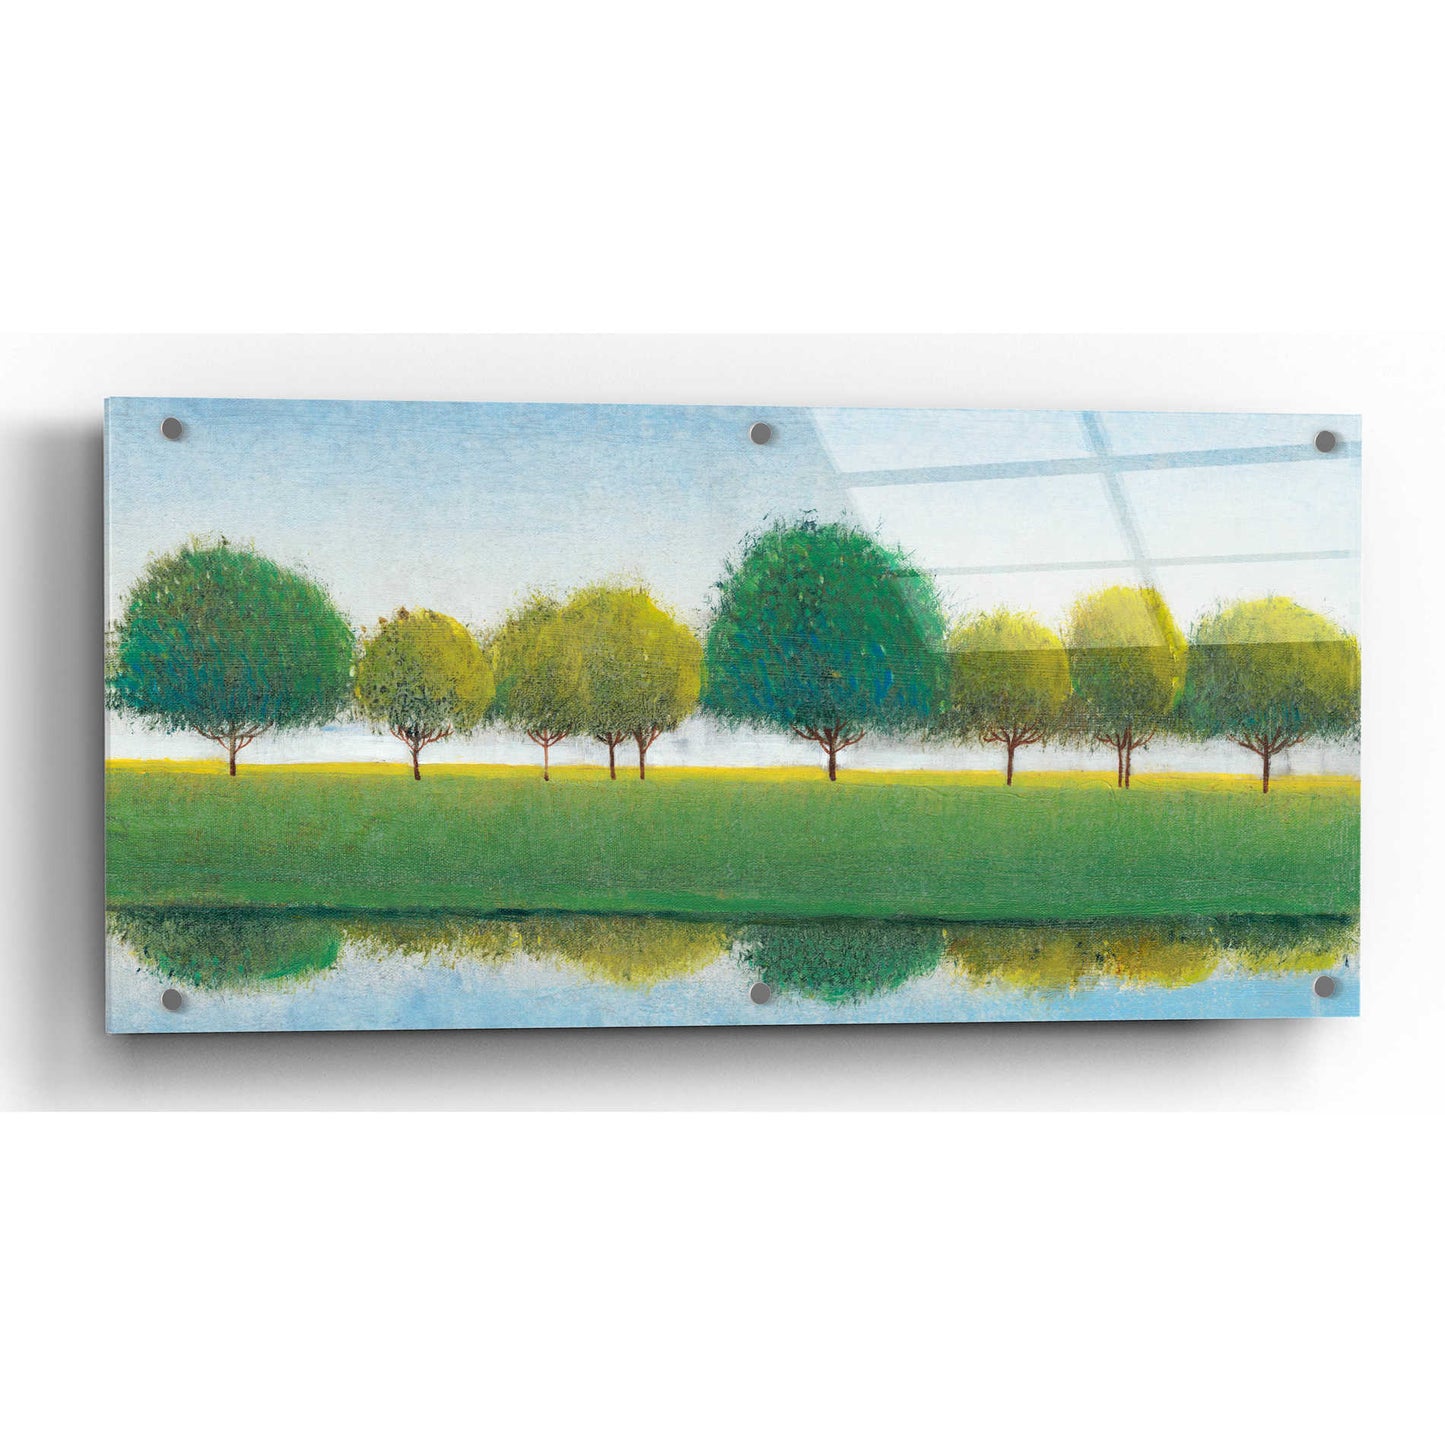 Epic Art 'Trees in a Line II' by Tim O'Toole, Acrylic Glass Wall Art,24x12